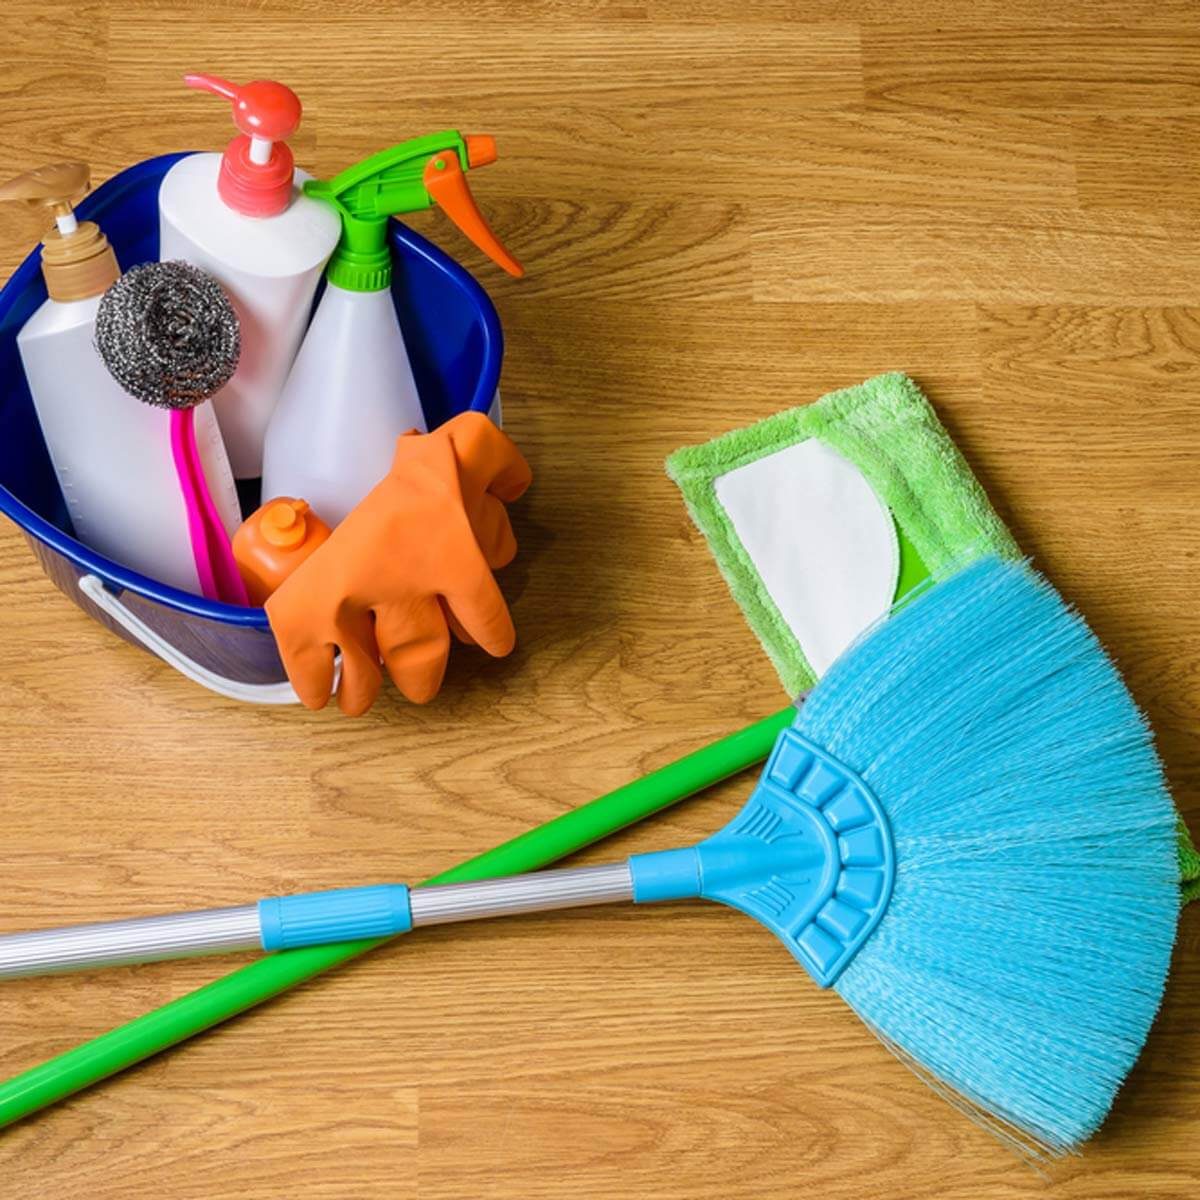 40+ Essential Household Items to Replace After a PCS: Cleaning Supplies,  Food, & More